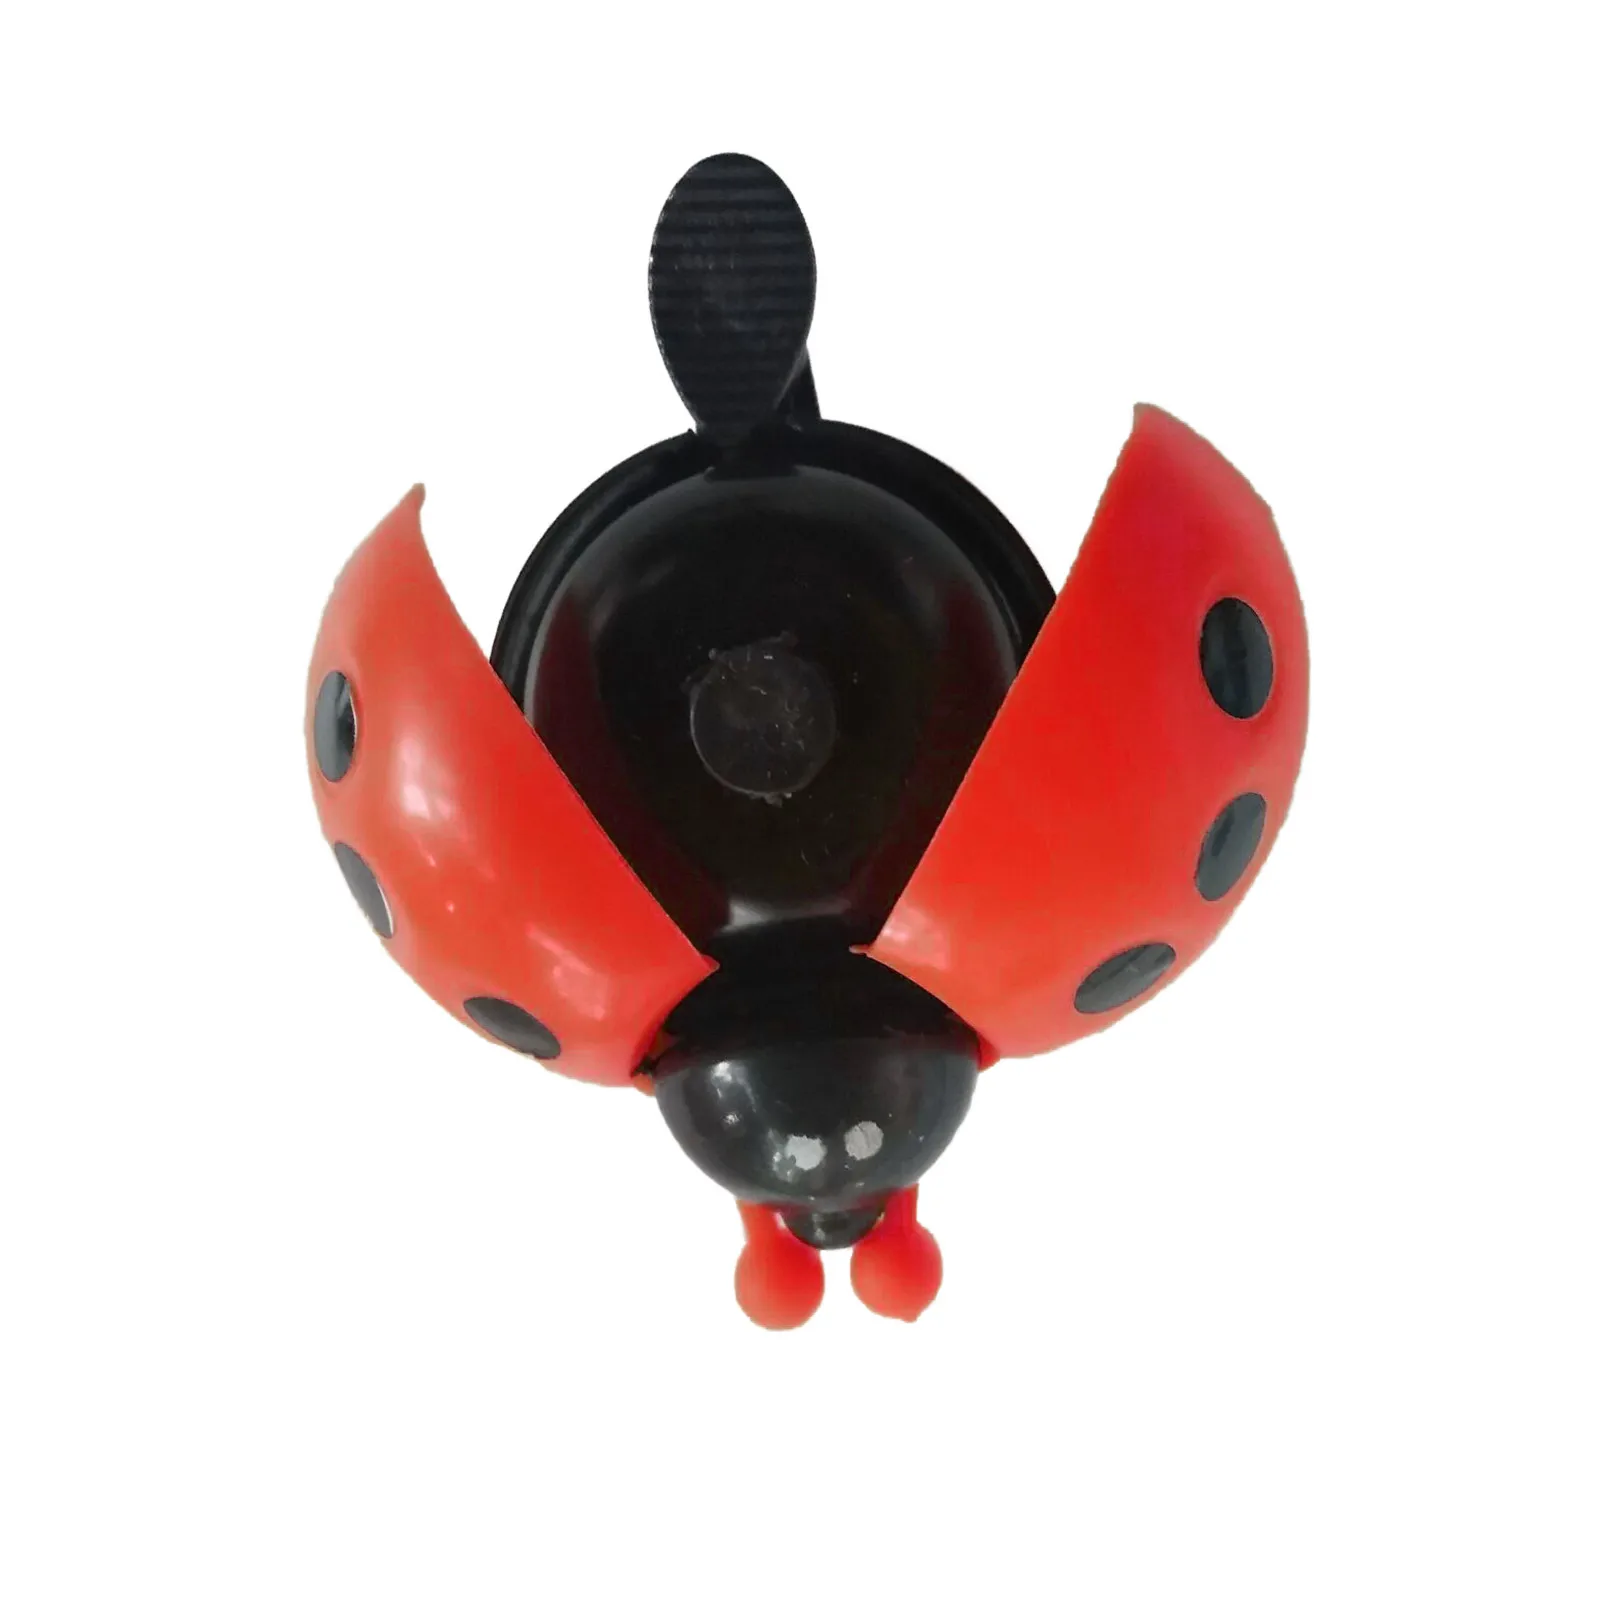 Bicycle Bell Ring Beetle Cartoon Cycling Bell Lovely Kids Ladybug Bell R... - $118.34